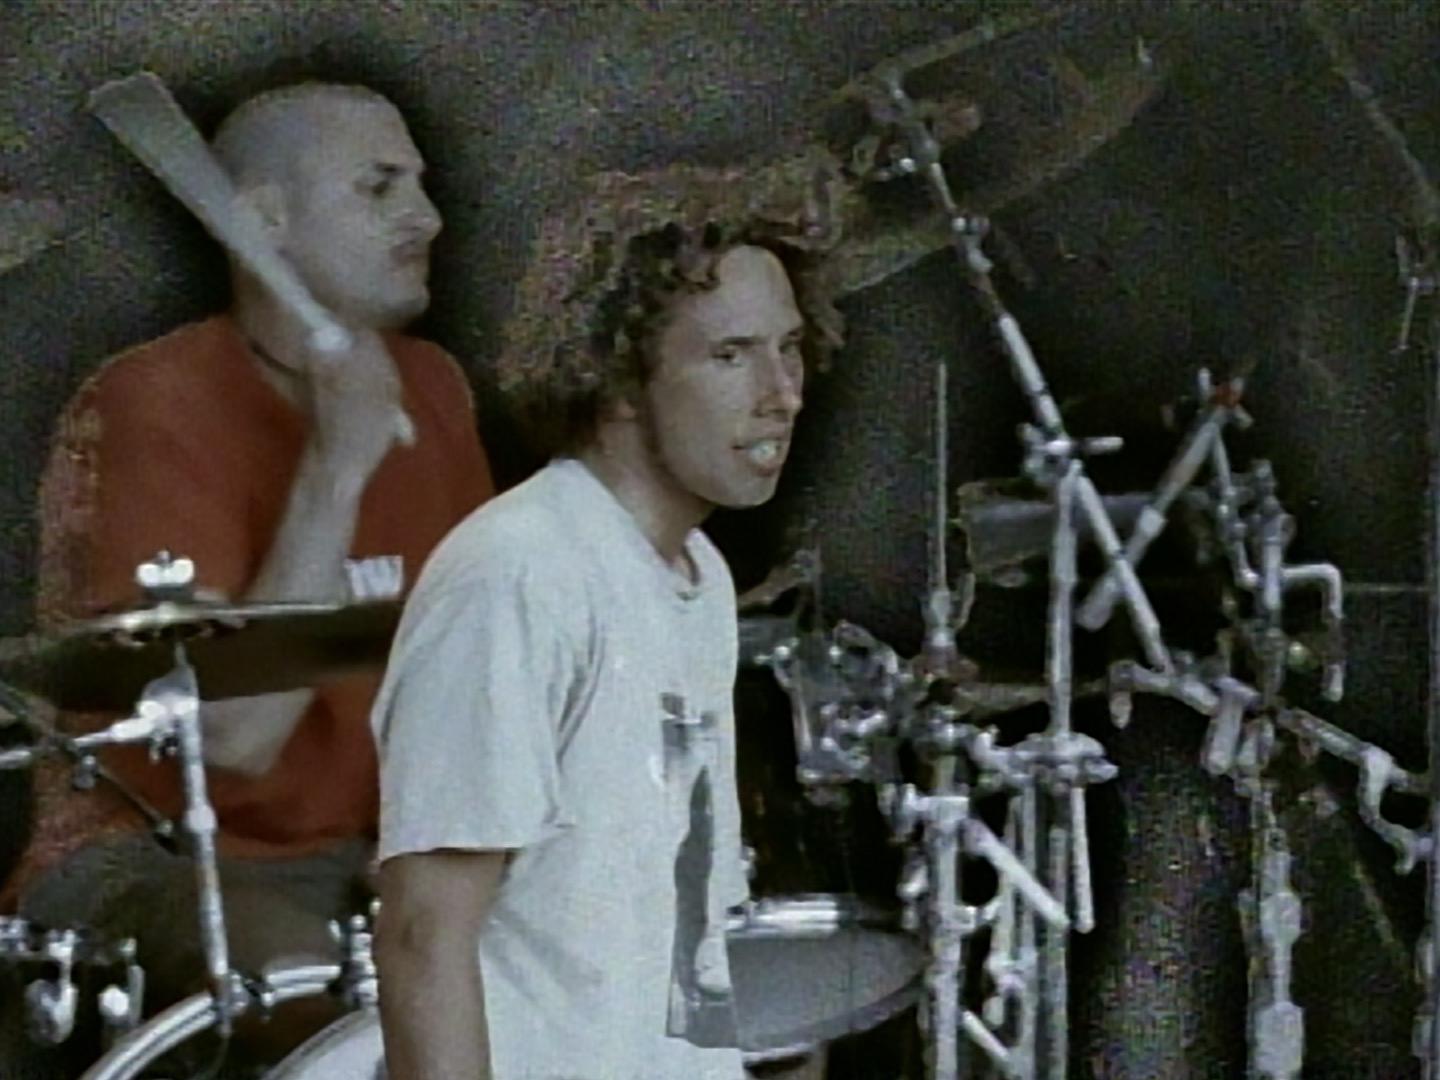 Rage Against the Machine - Bulls On Parade (Official Music Video)